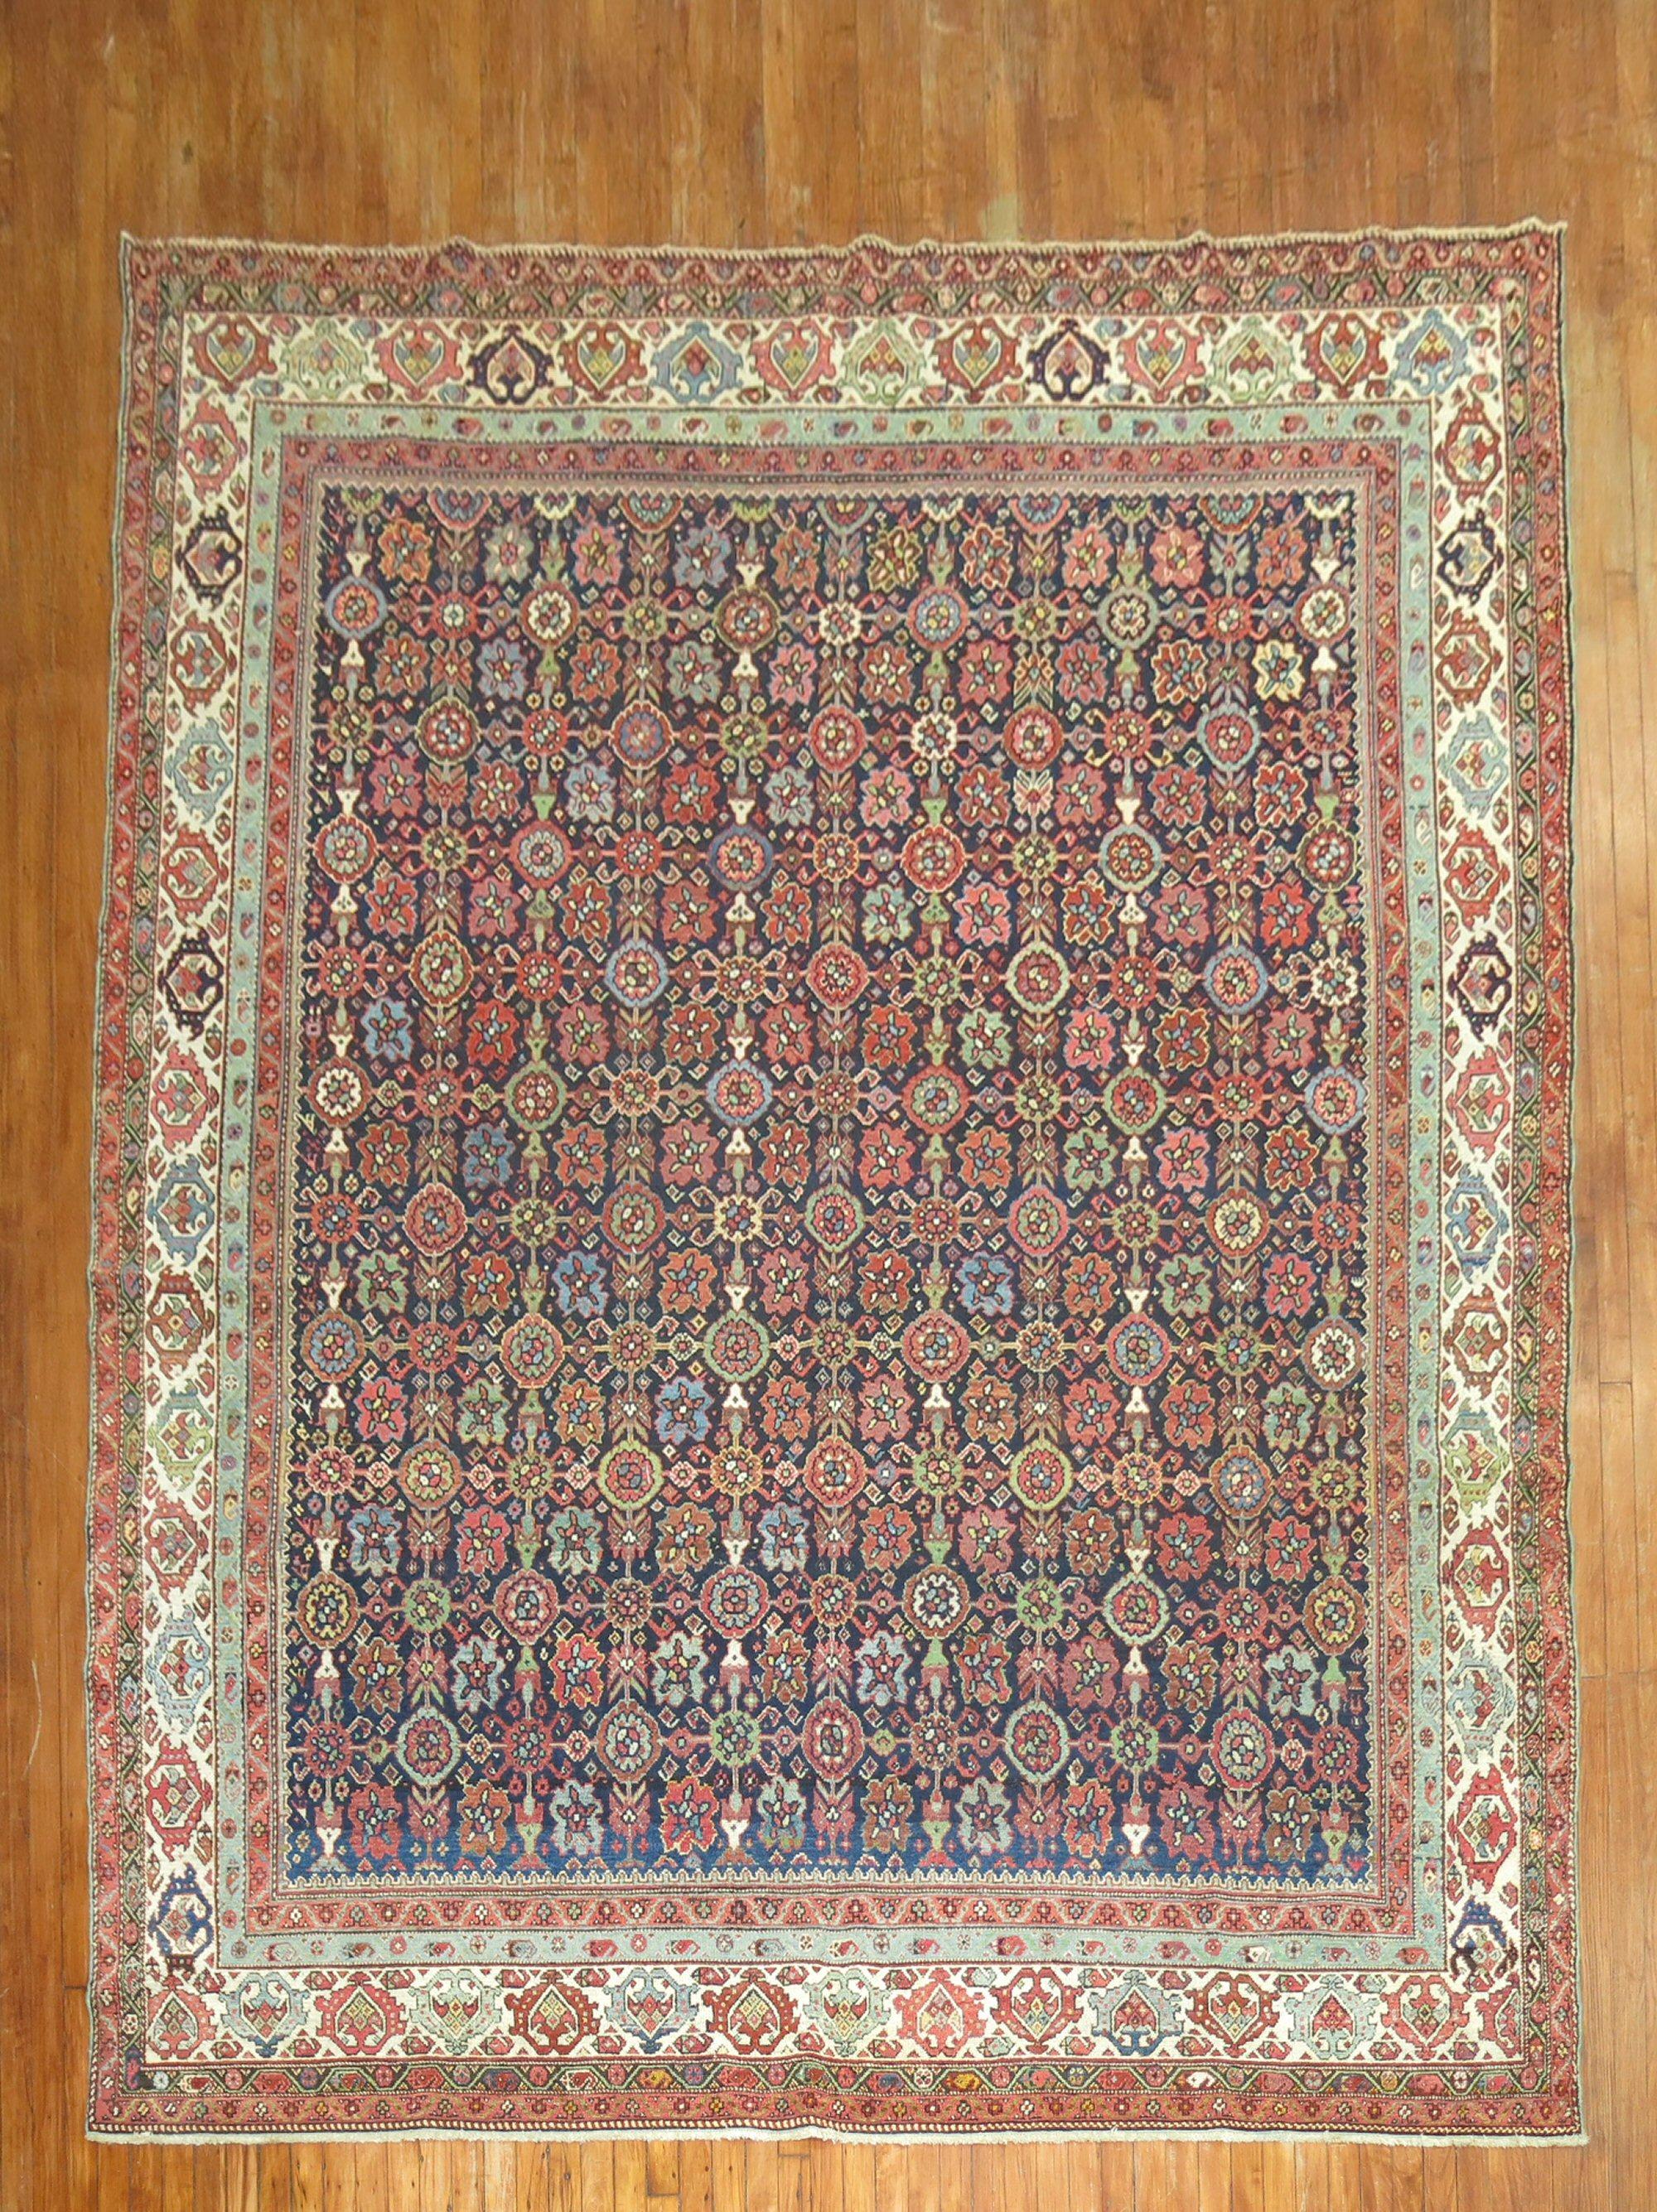 Decorative early 20th-century Room size Persian Malayer rug with a mini Khani design on a navy ground

Measures: 8'9'' x 11'1''.